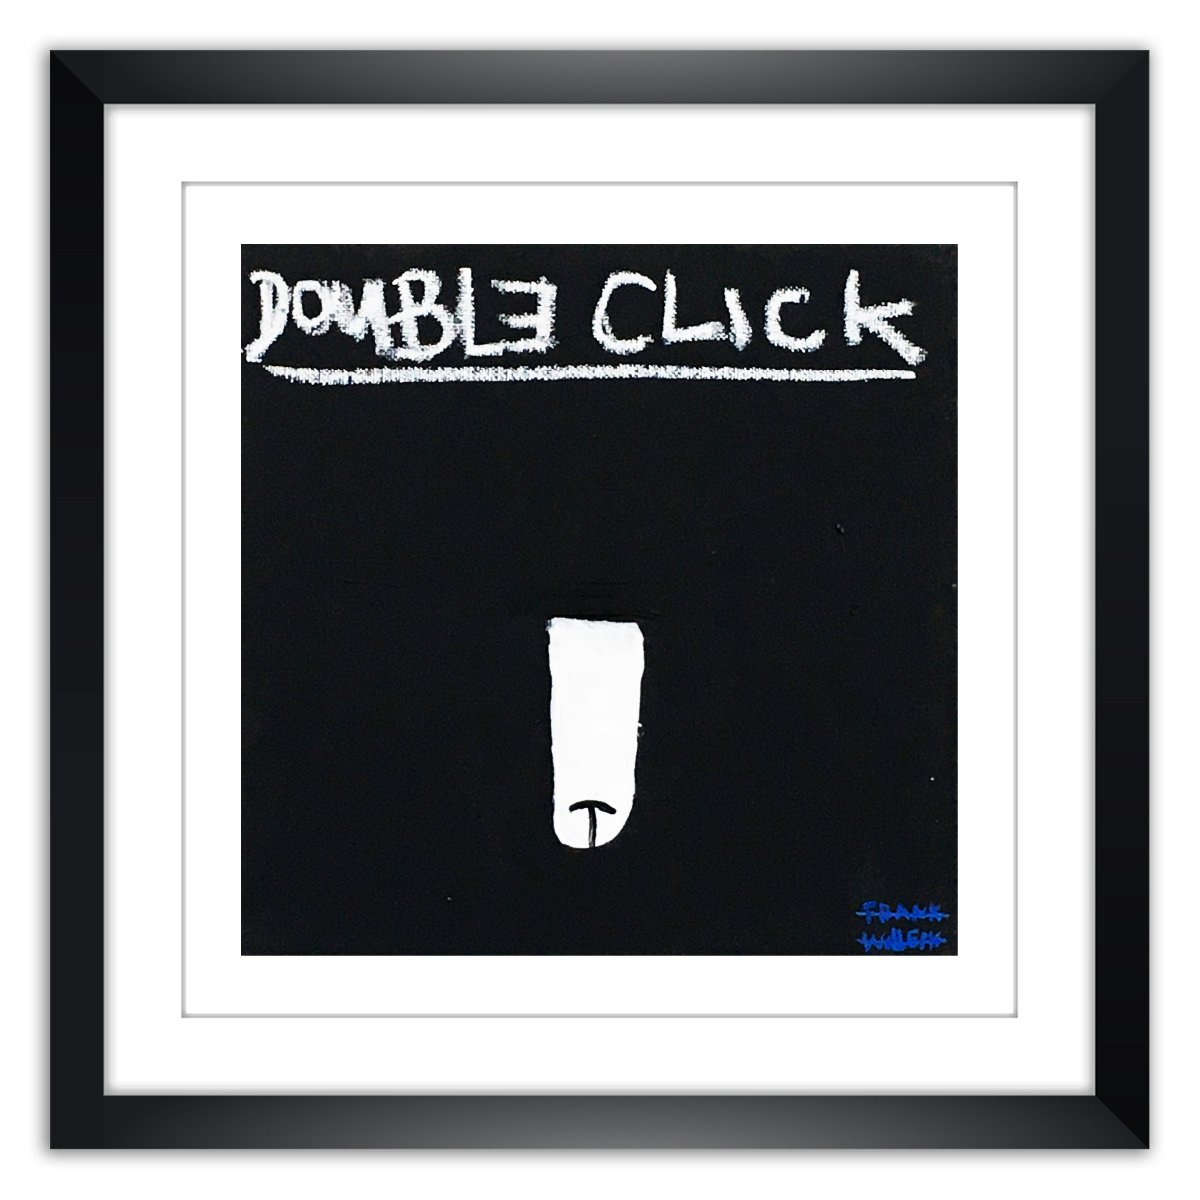 Limited prints - DOUBLE CLICK framed - Frank Willems